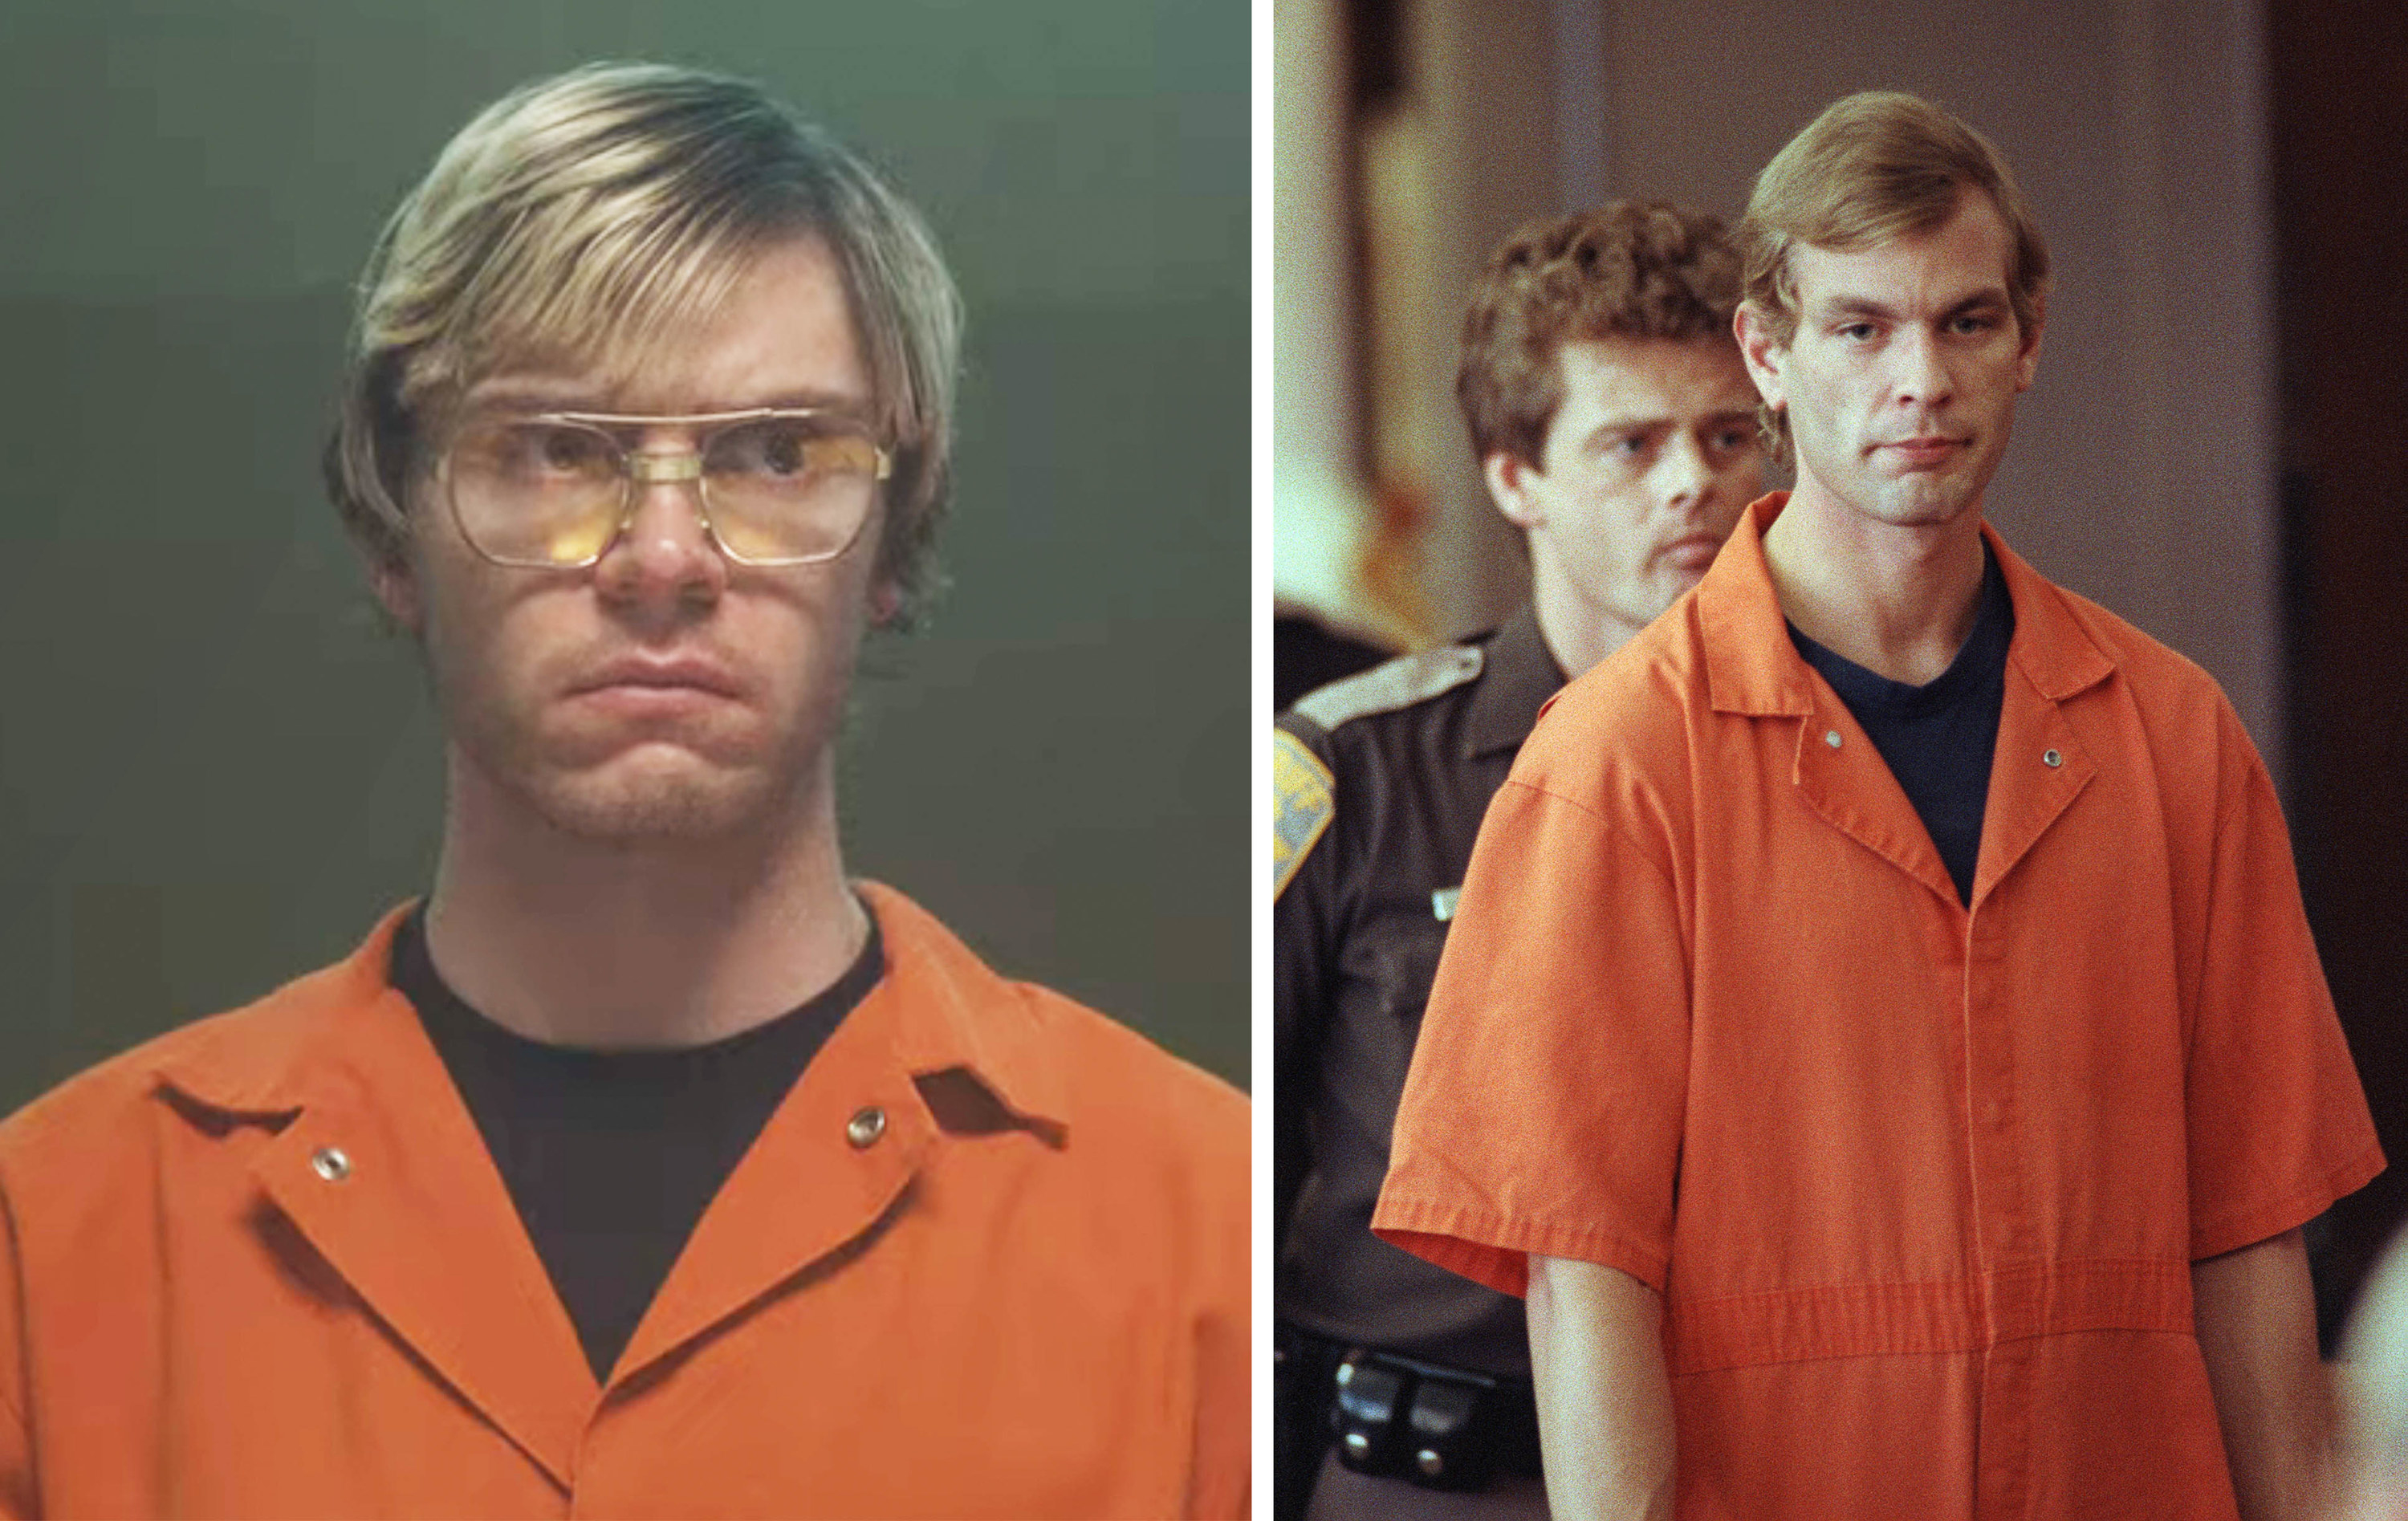 Evan Peters as Jeffrey Dahmer in the series juxtaposed with the real Jeffrey Dahmer; they are wearing the same clothes and share the same blank expression